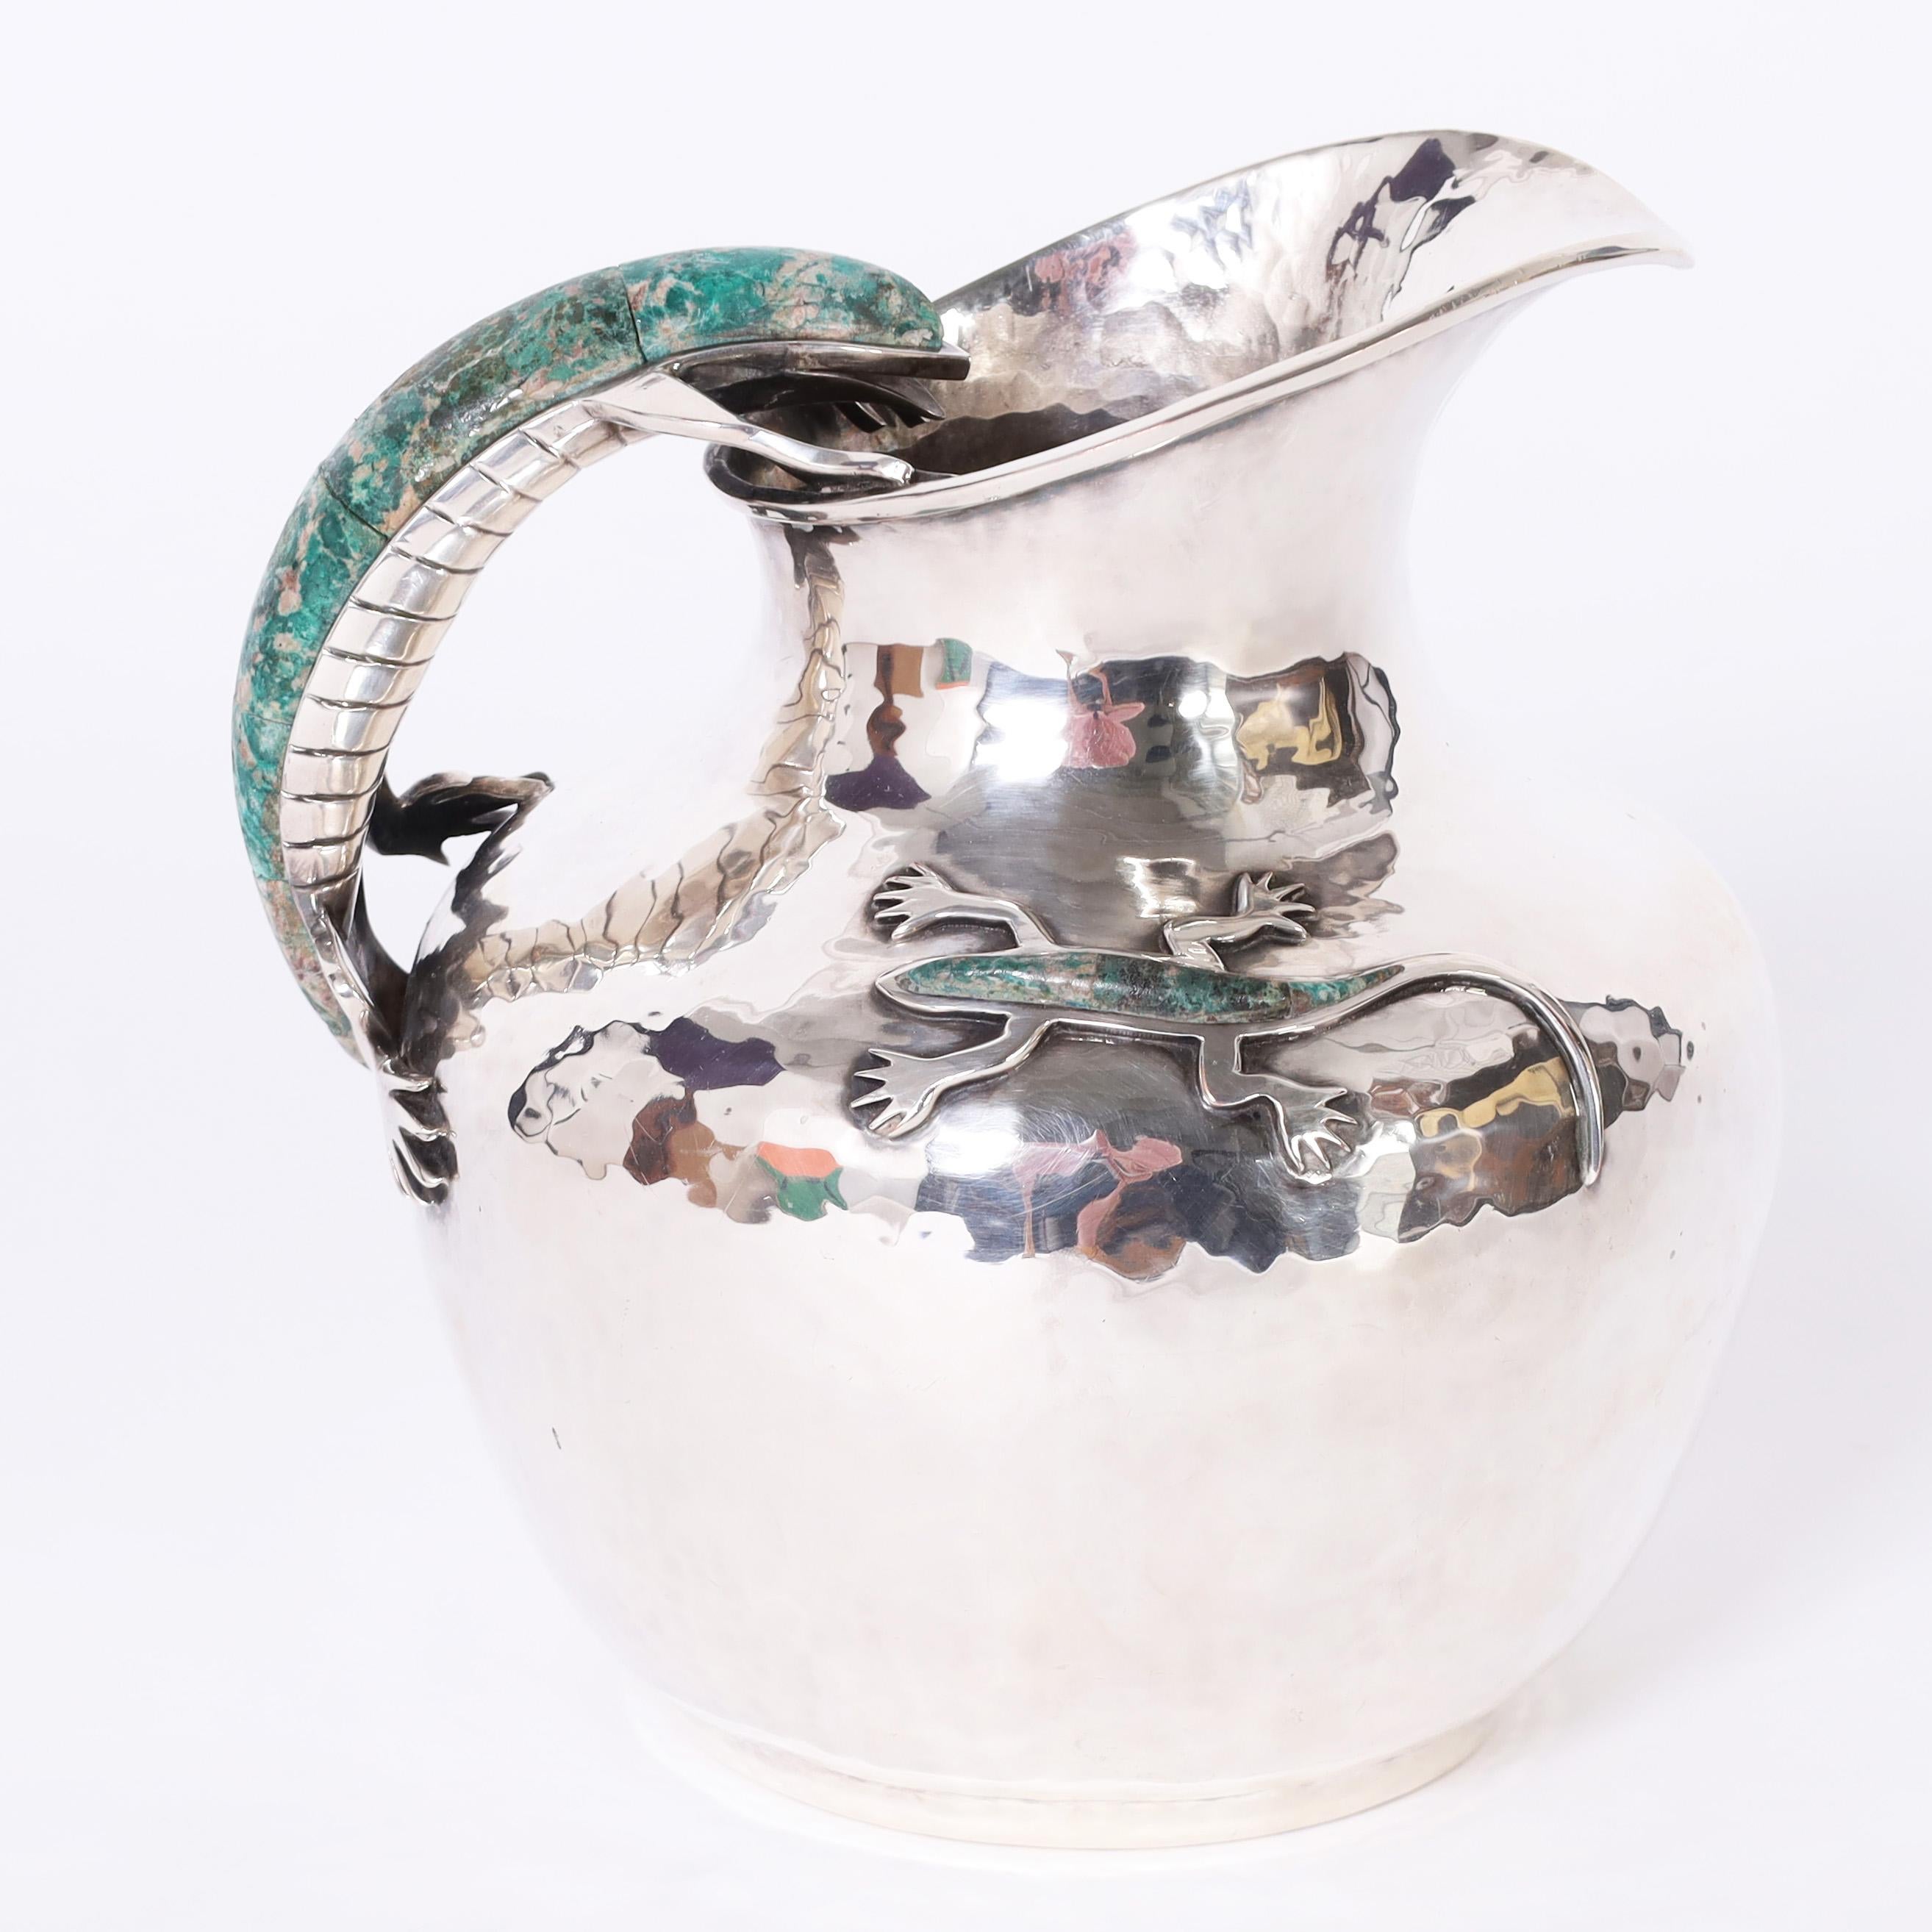 Mid-Century Modern Vintage Silver Plate Pitcher with Lizards by Emilia Castillo For Sale